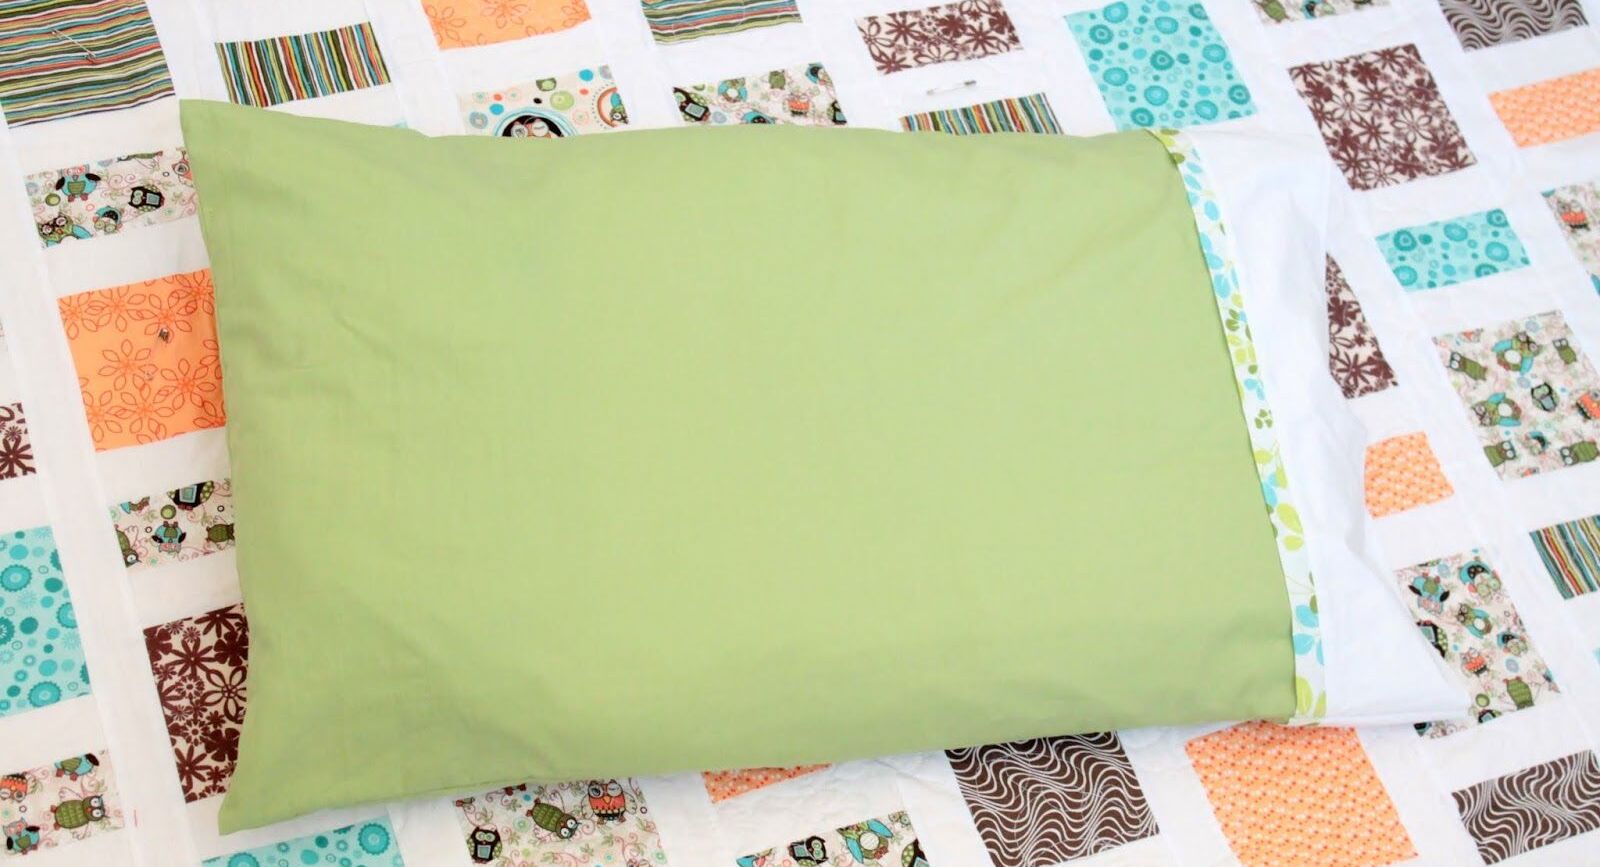 How Much Fabric Is Needed For A Pillowcase